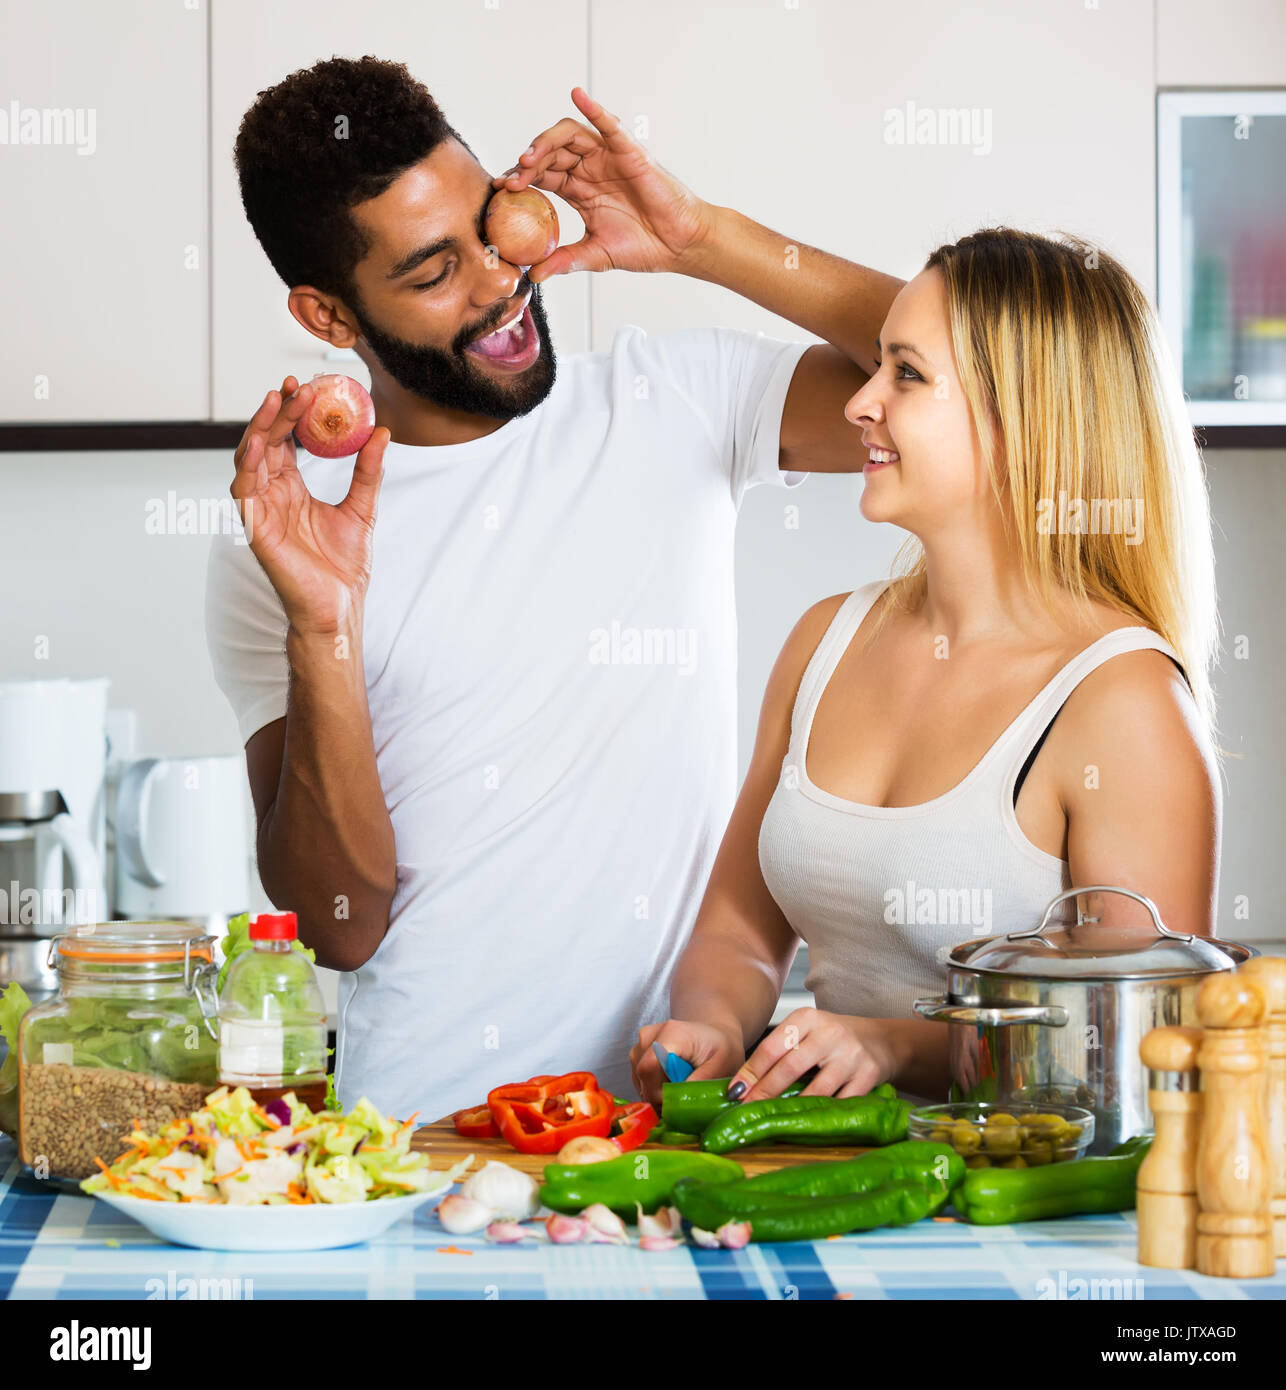 Young interracial couple cooking vegetables and laughing in home interior. Focus on man Stock Photo